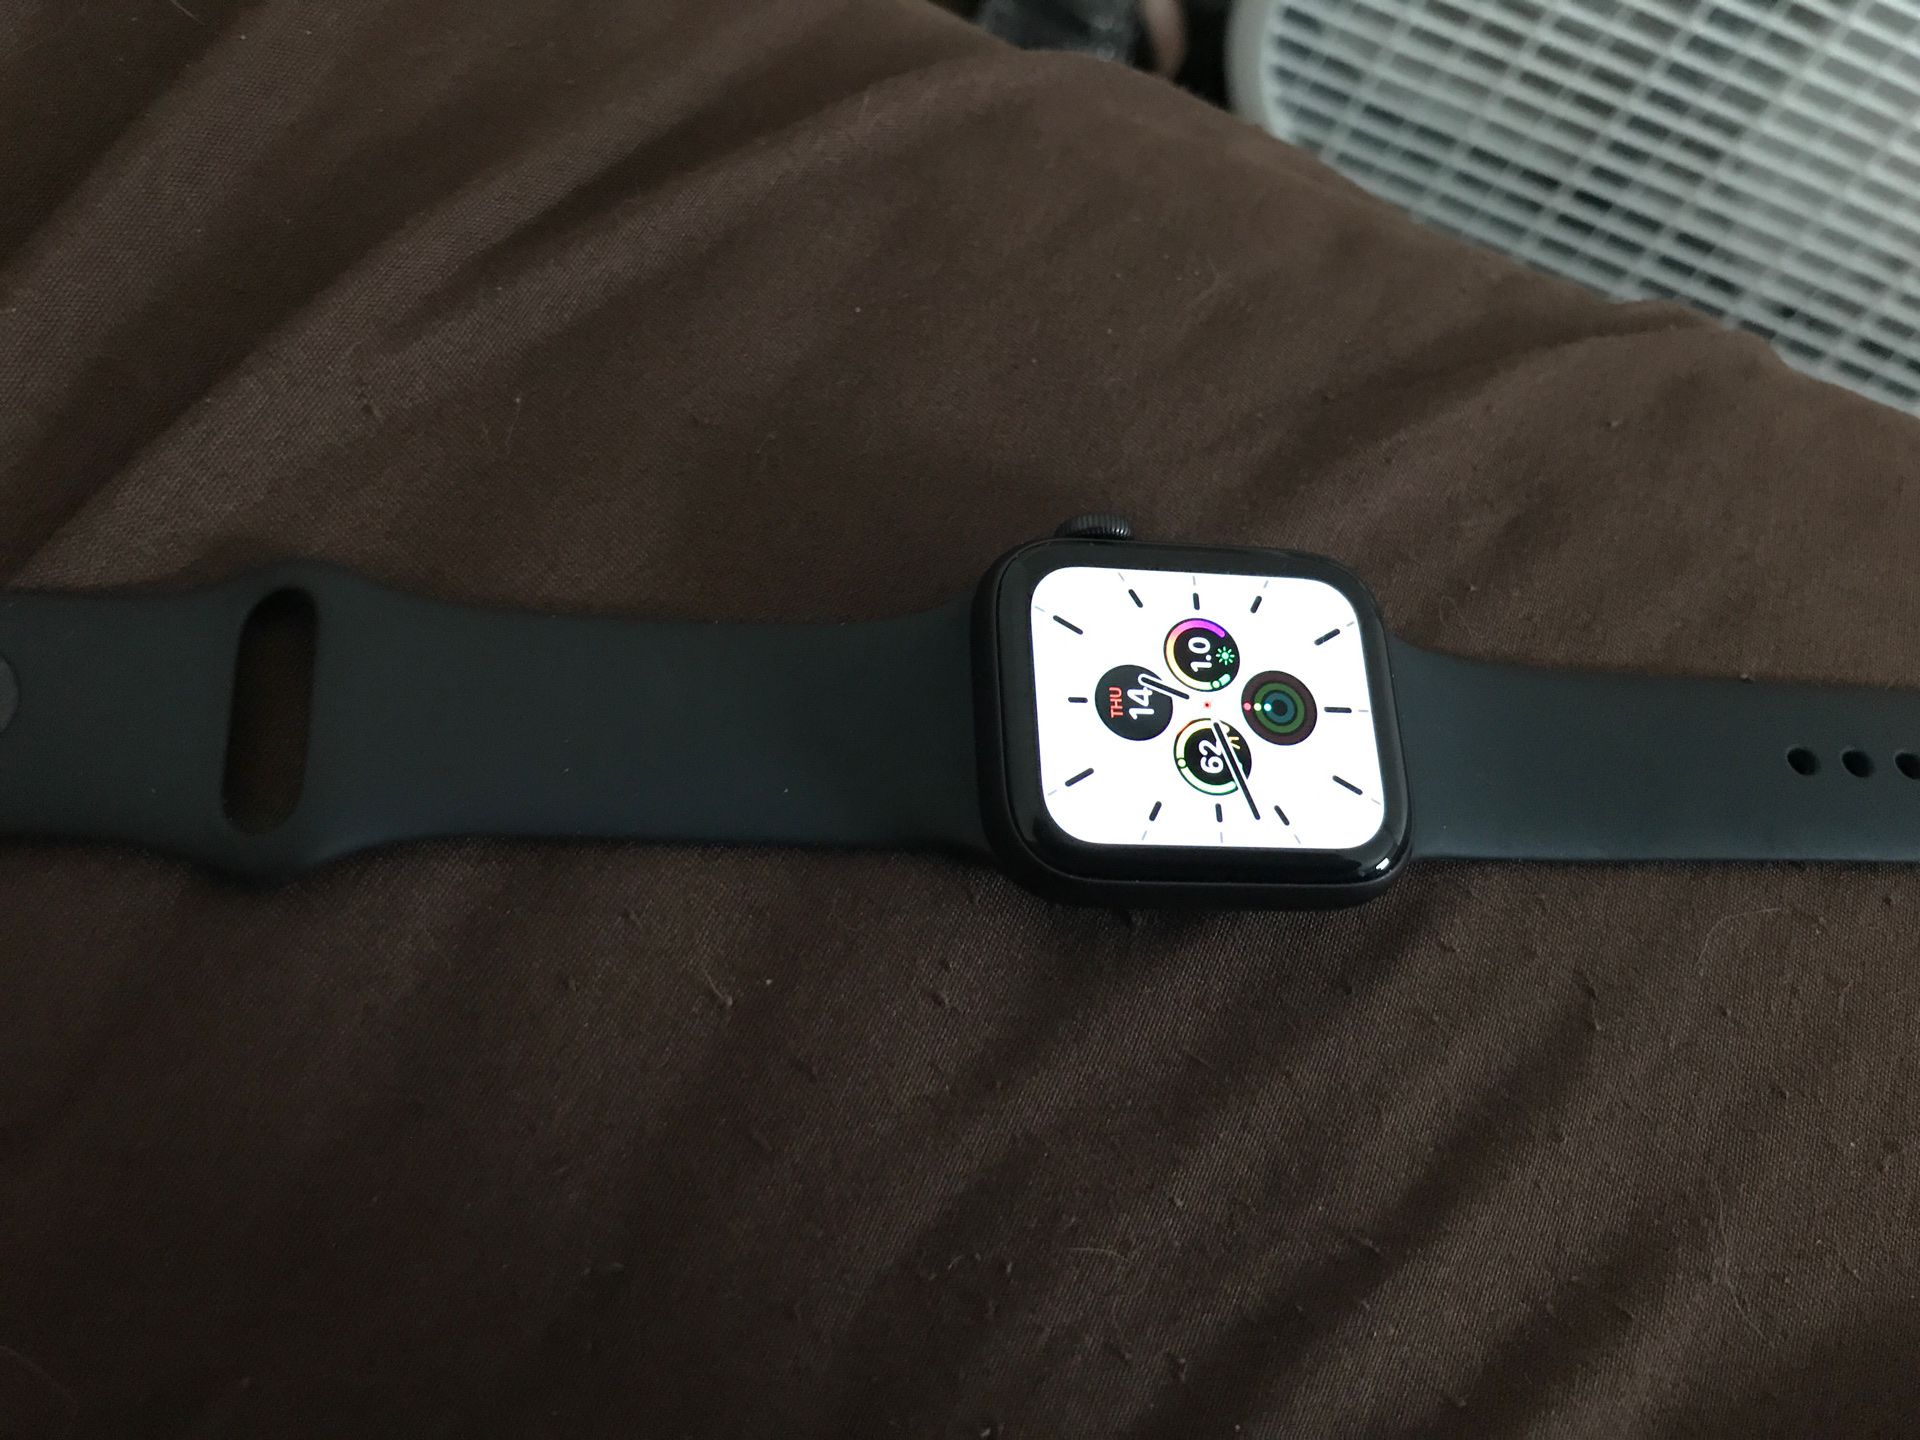 Apple Watch series 5 new in box